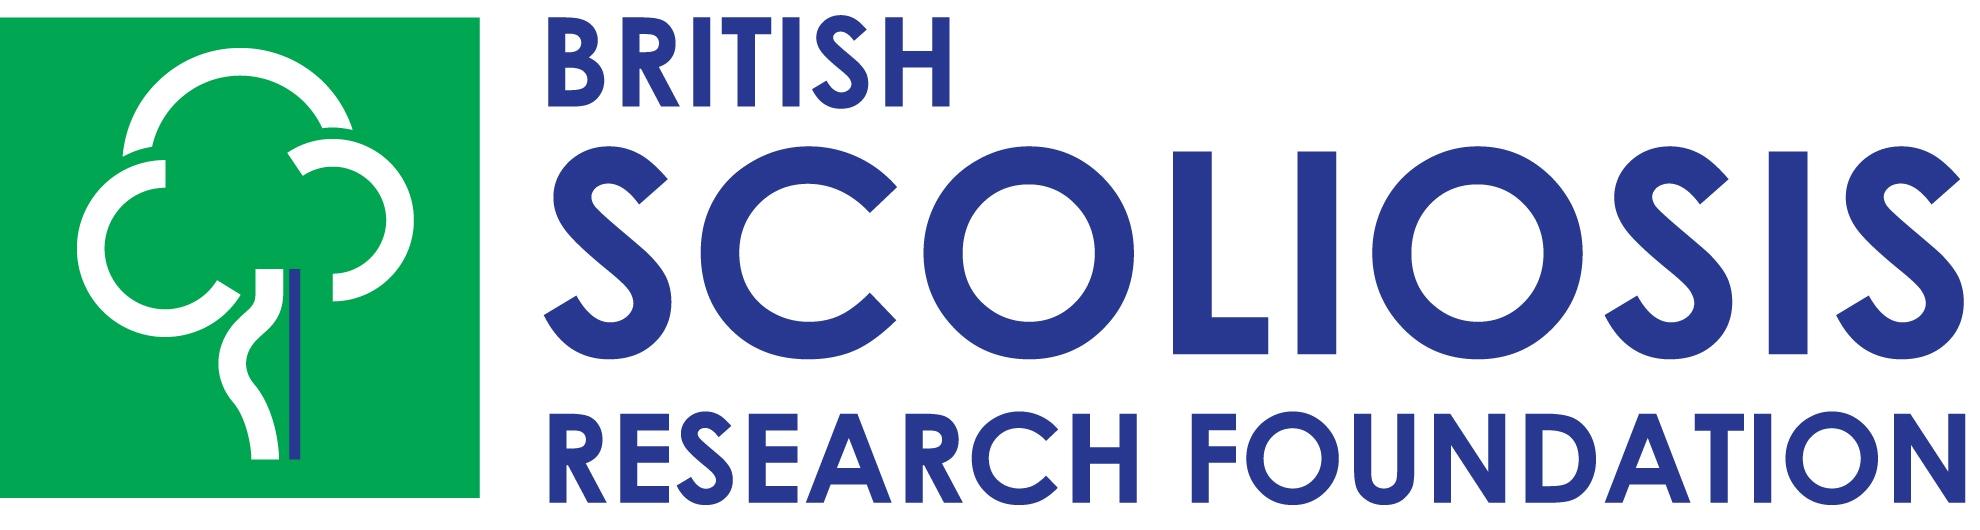 Bsrf Logo - British Scoliosis Research Foundation > all events